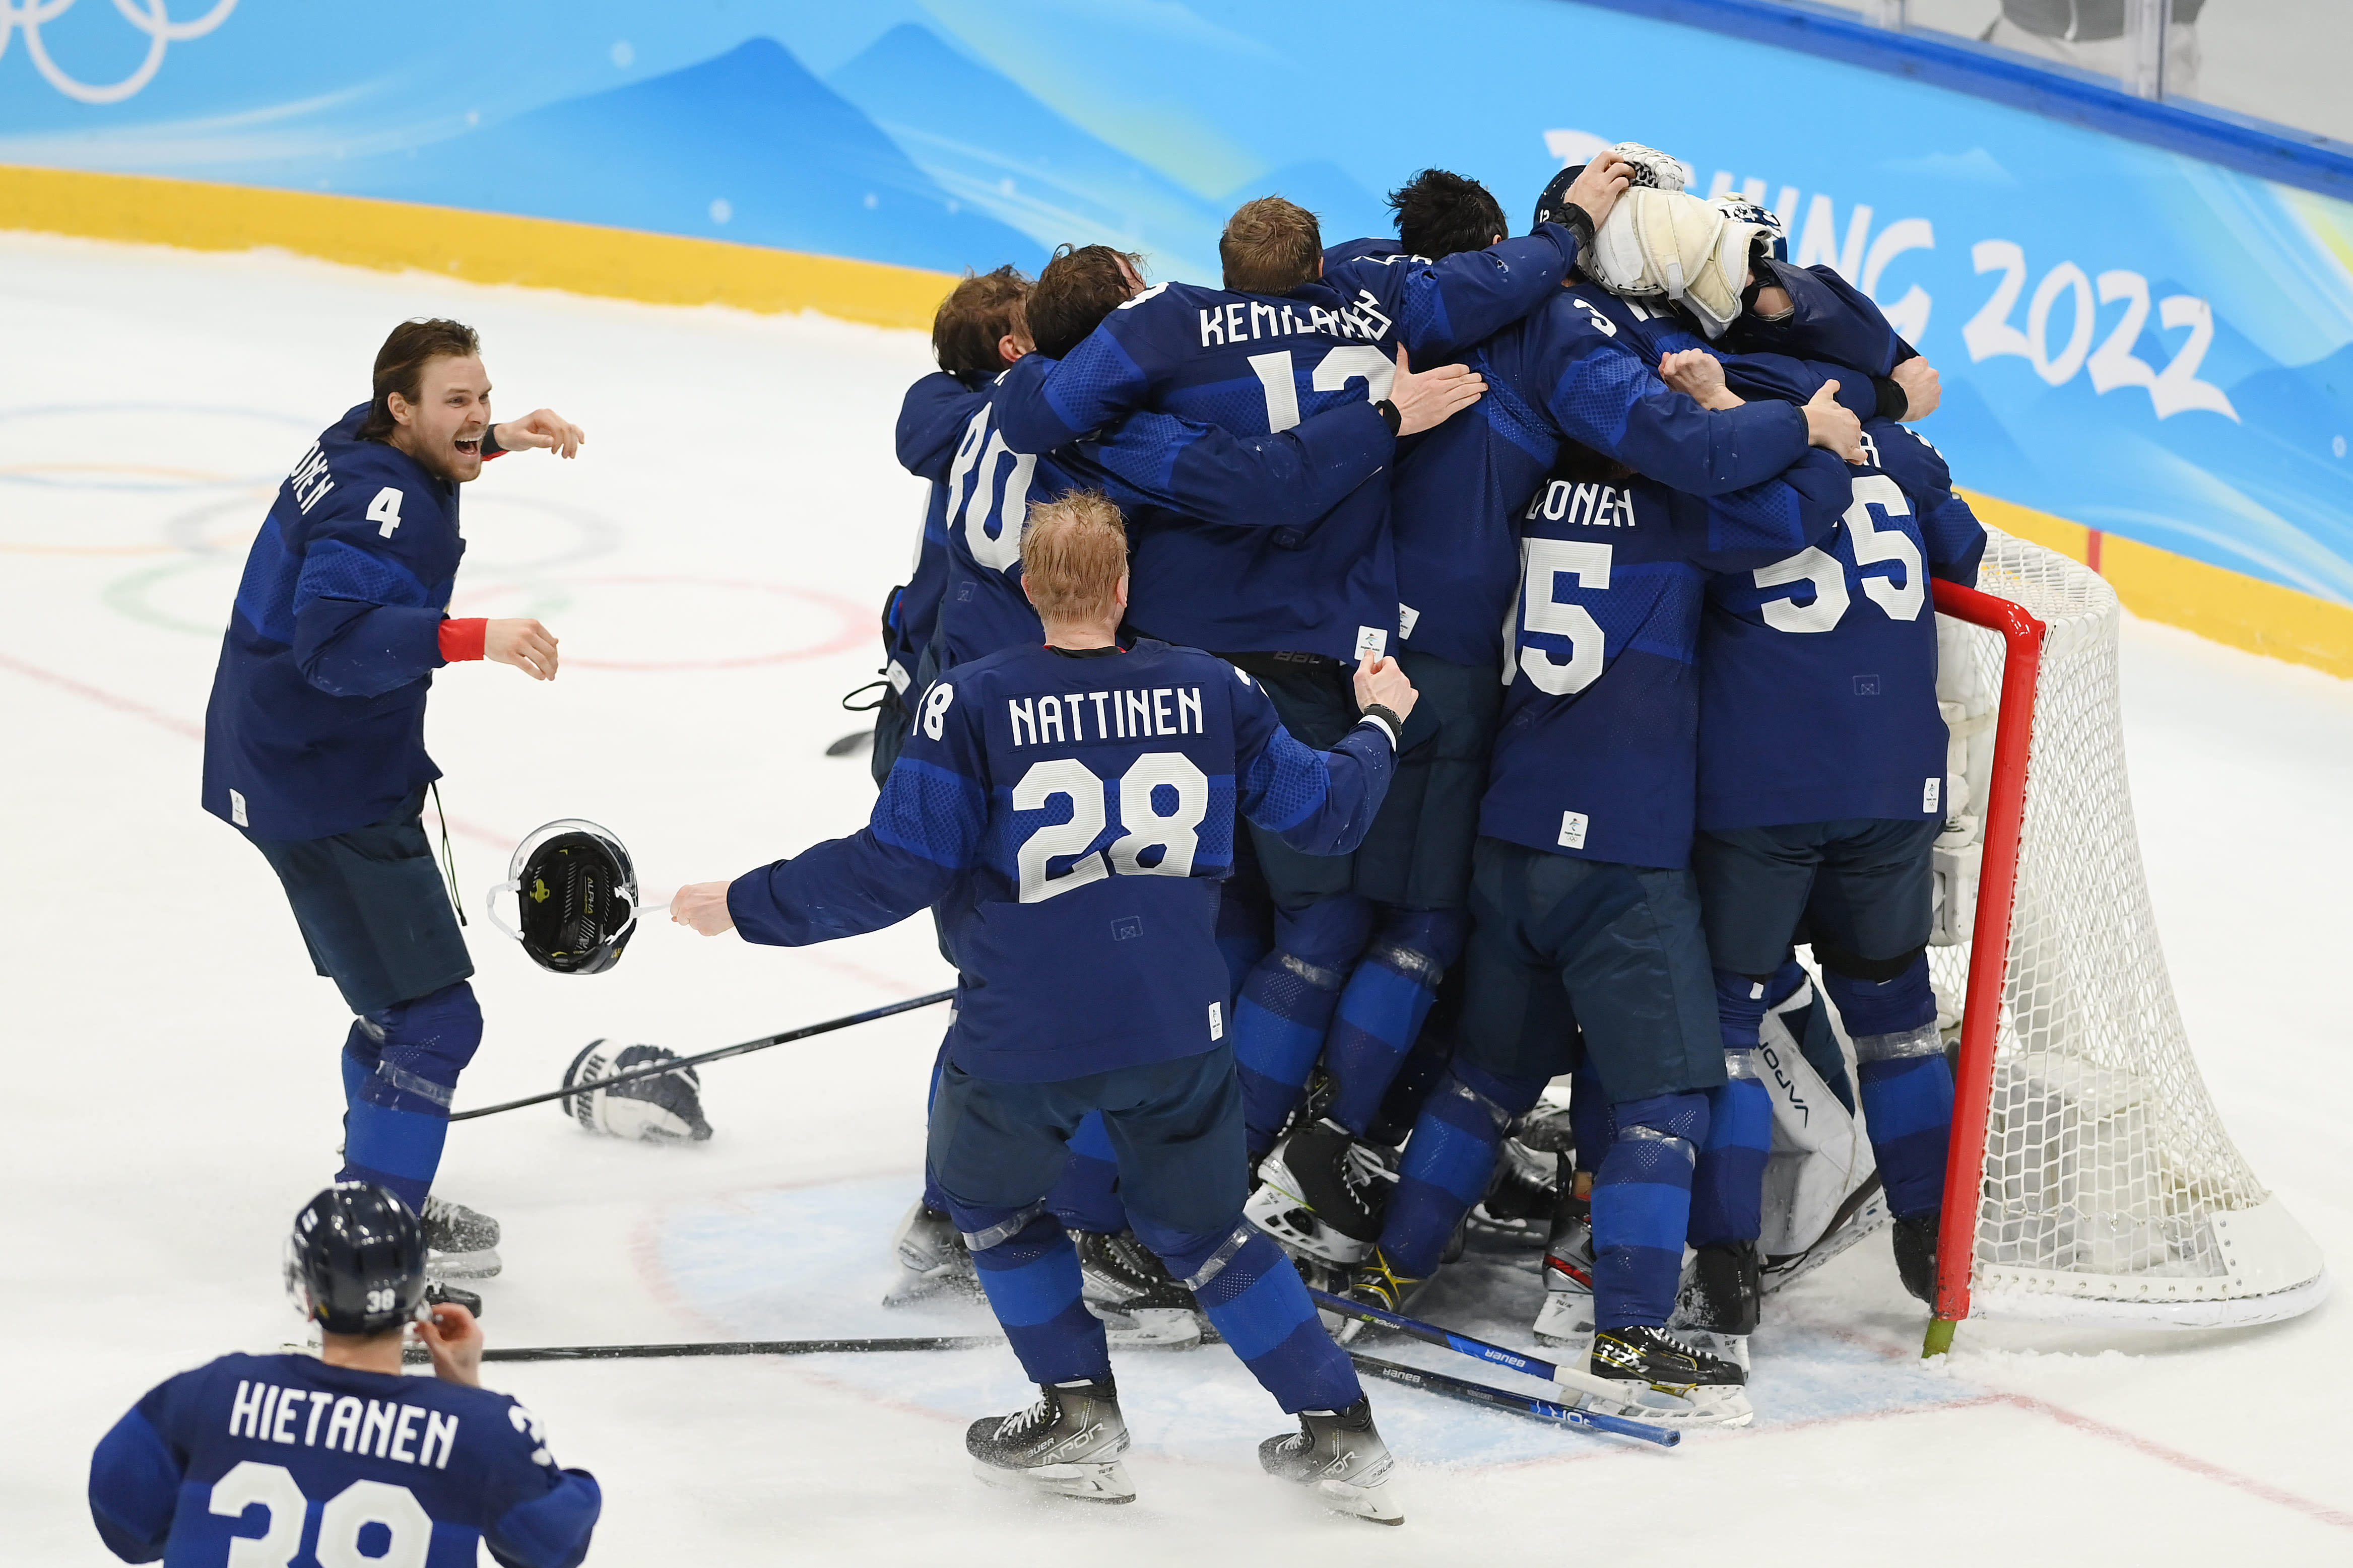 IIHF Ice Hockey World Championship 2022 Preview, schedule, how to watch top stars in action